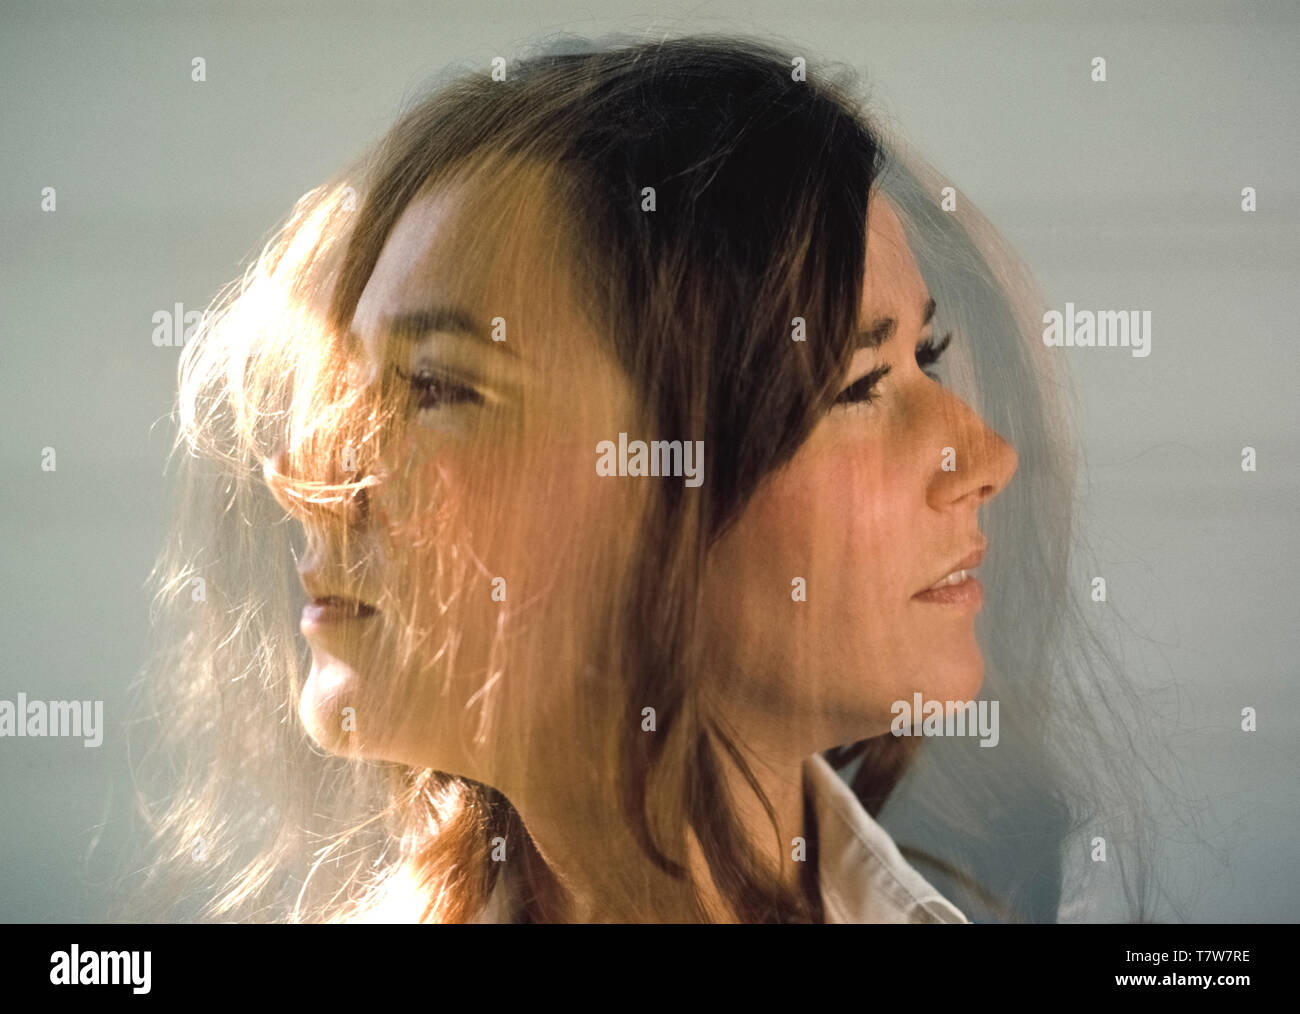 Overlapping images of the same face show the creativity that can be achieved with a camera. This double-exposure photograph of the face of a pretty woman was made with natural sunlight against a plain background. She turned her head to the left for a profile with the first exposure, and then turned it to the right for a profile of the opposite side of her face with another exposure on the same frame of film. Sunlight falling directly on her from the left highlighted some strands of hair in the first exposure and some of her face in the second exposure. Stock Photo